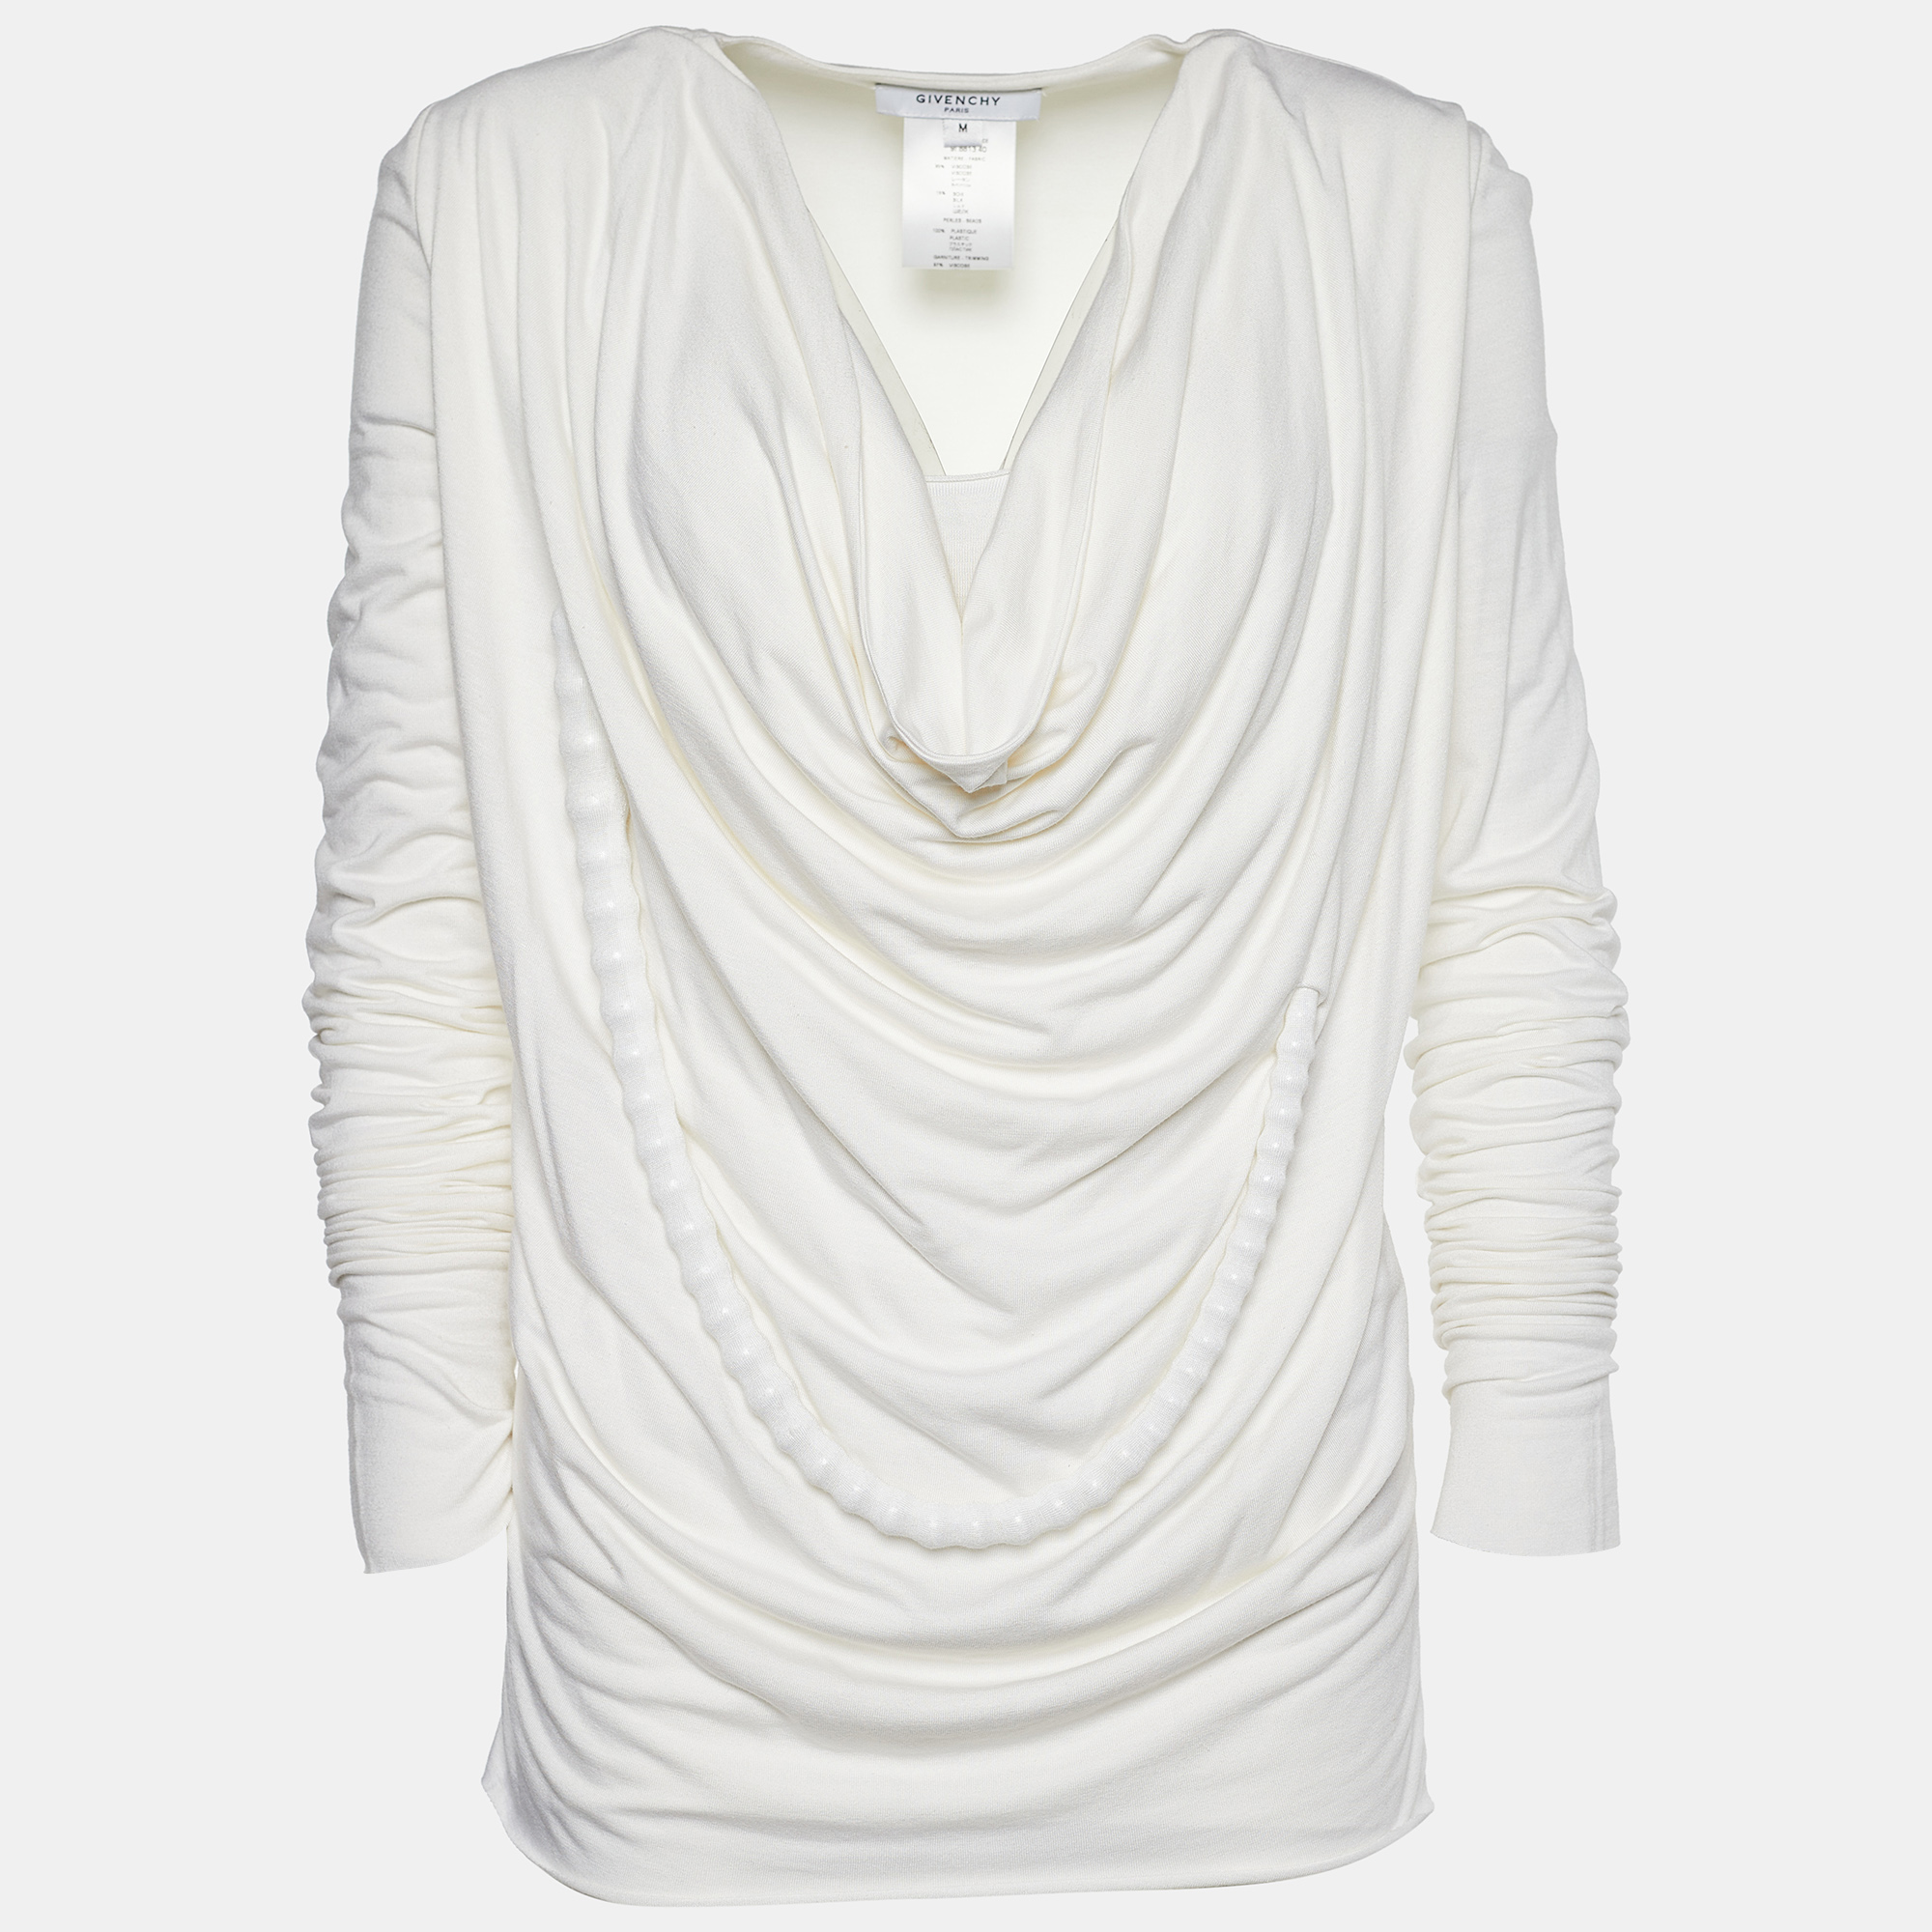 

Givenchy Off-White Stretch Knit Beaded Chain Detail Draped Blouse, Cream